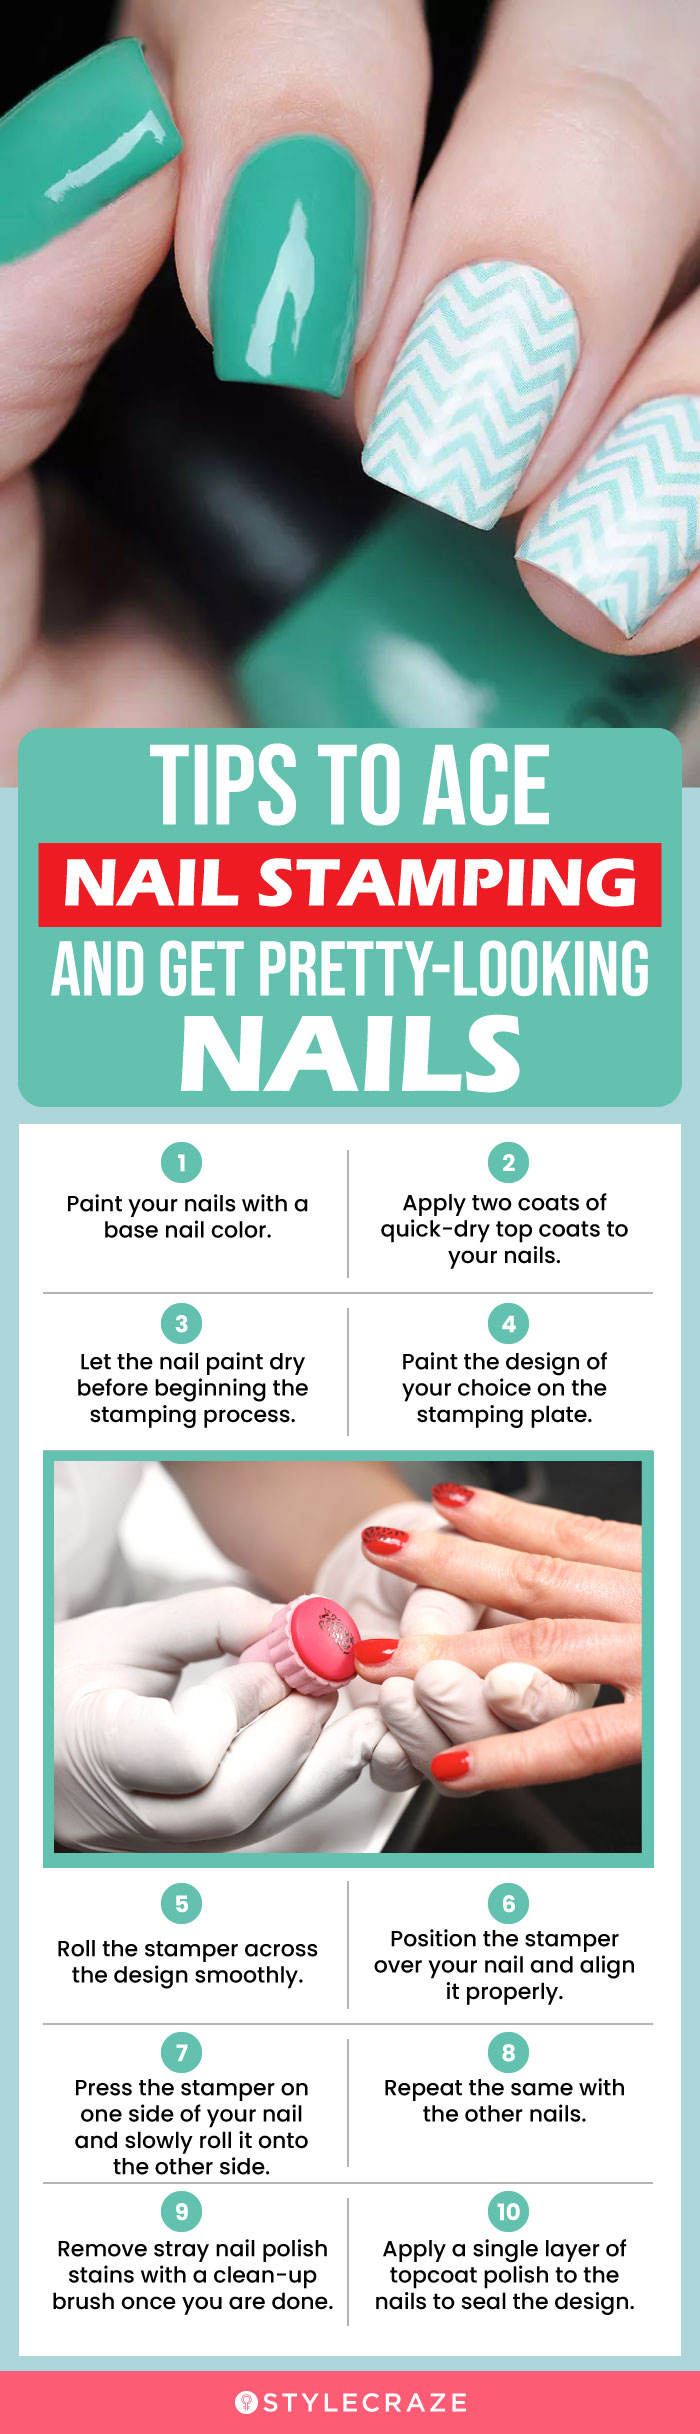 Tips To Ace Nail Stamping And Get Pretty-Looking Nails (infographic)